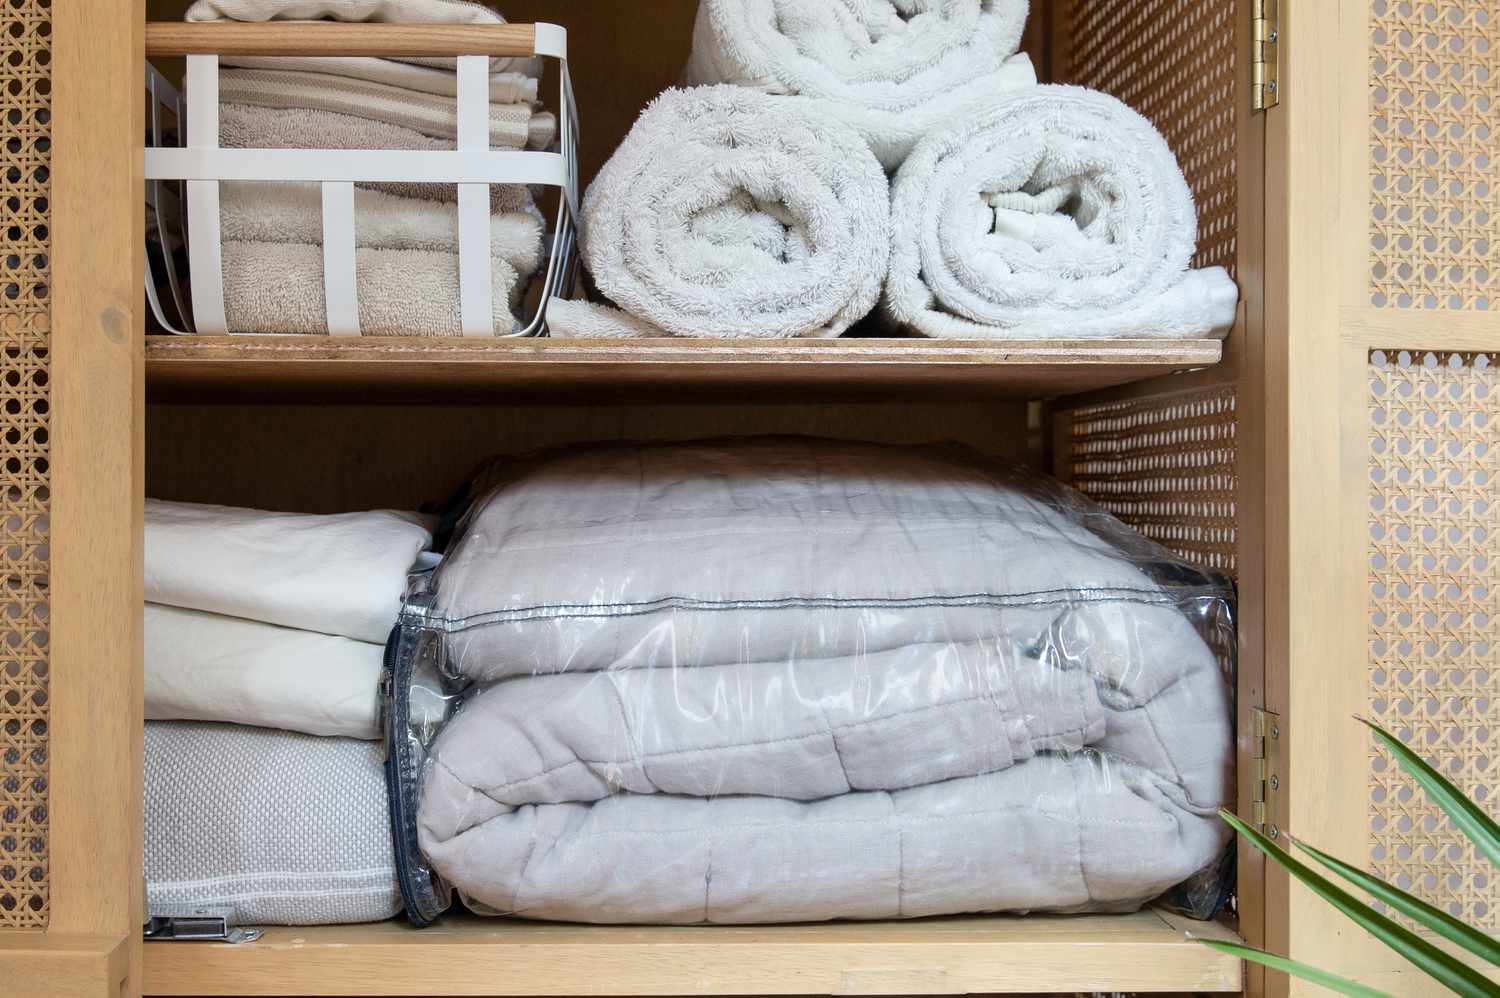 How To Store Comforters When Not In Use